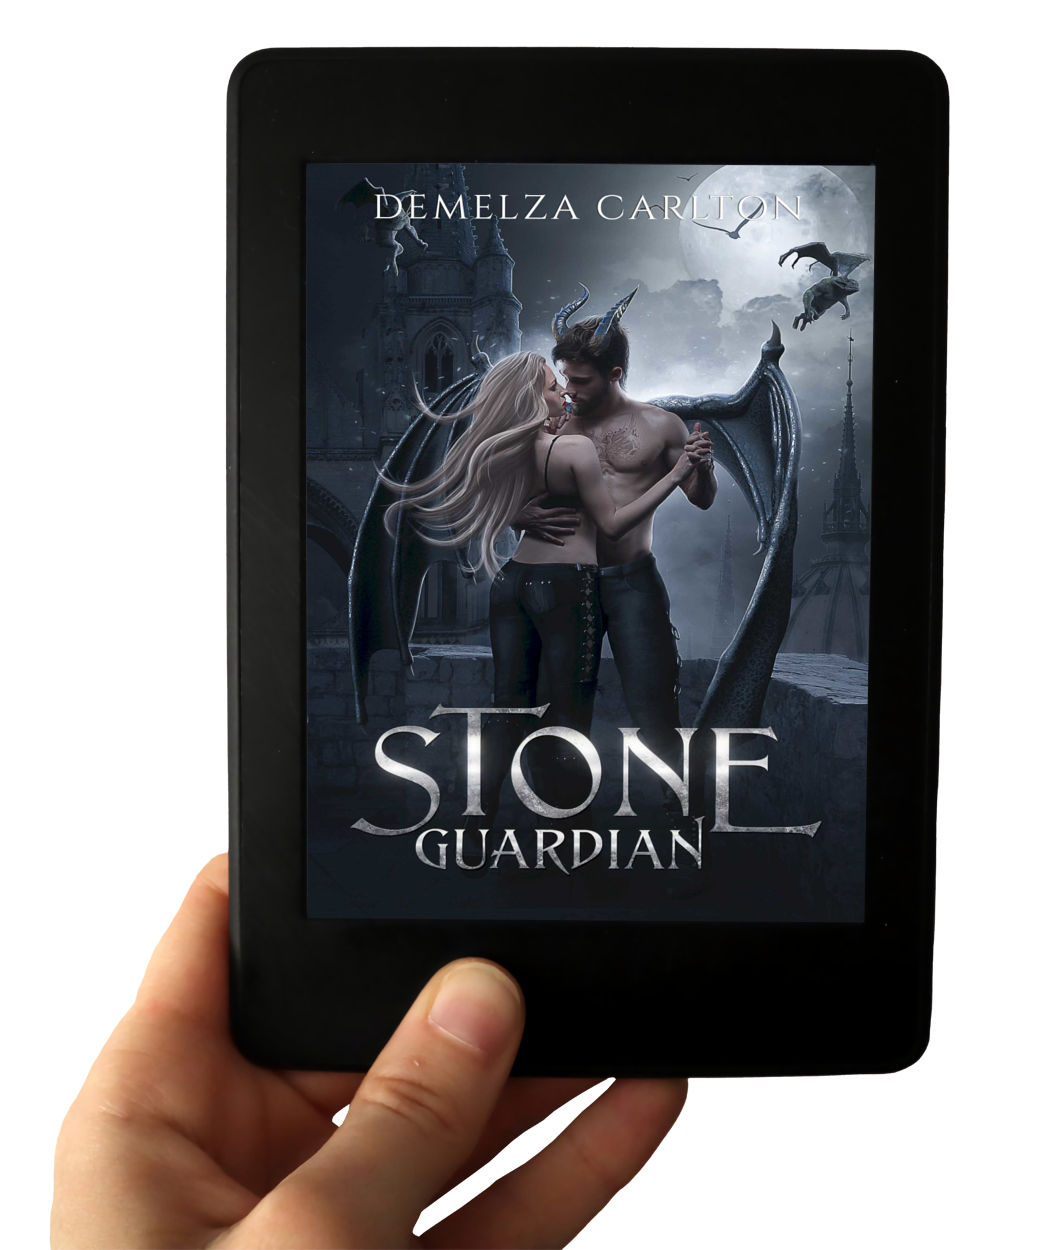 Stone Guardian: A Paranormal Protector Tale Book 1 in the Heart of Steel series by USA Today Bestselling Author Demelza Carlton ebook